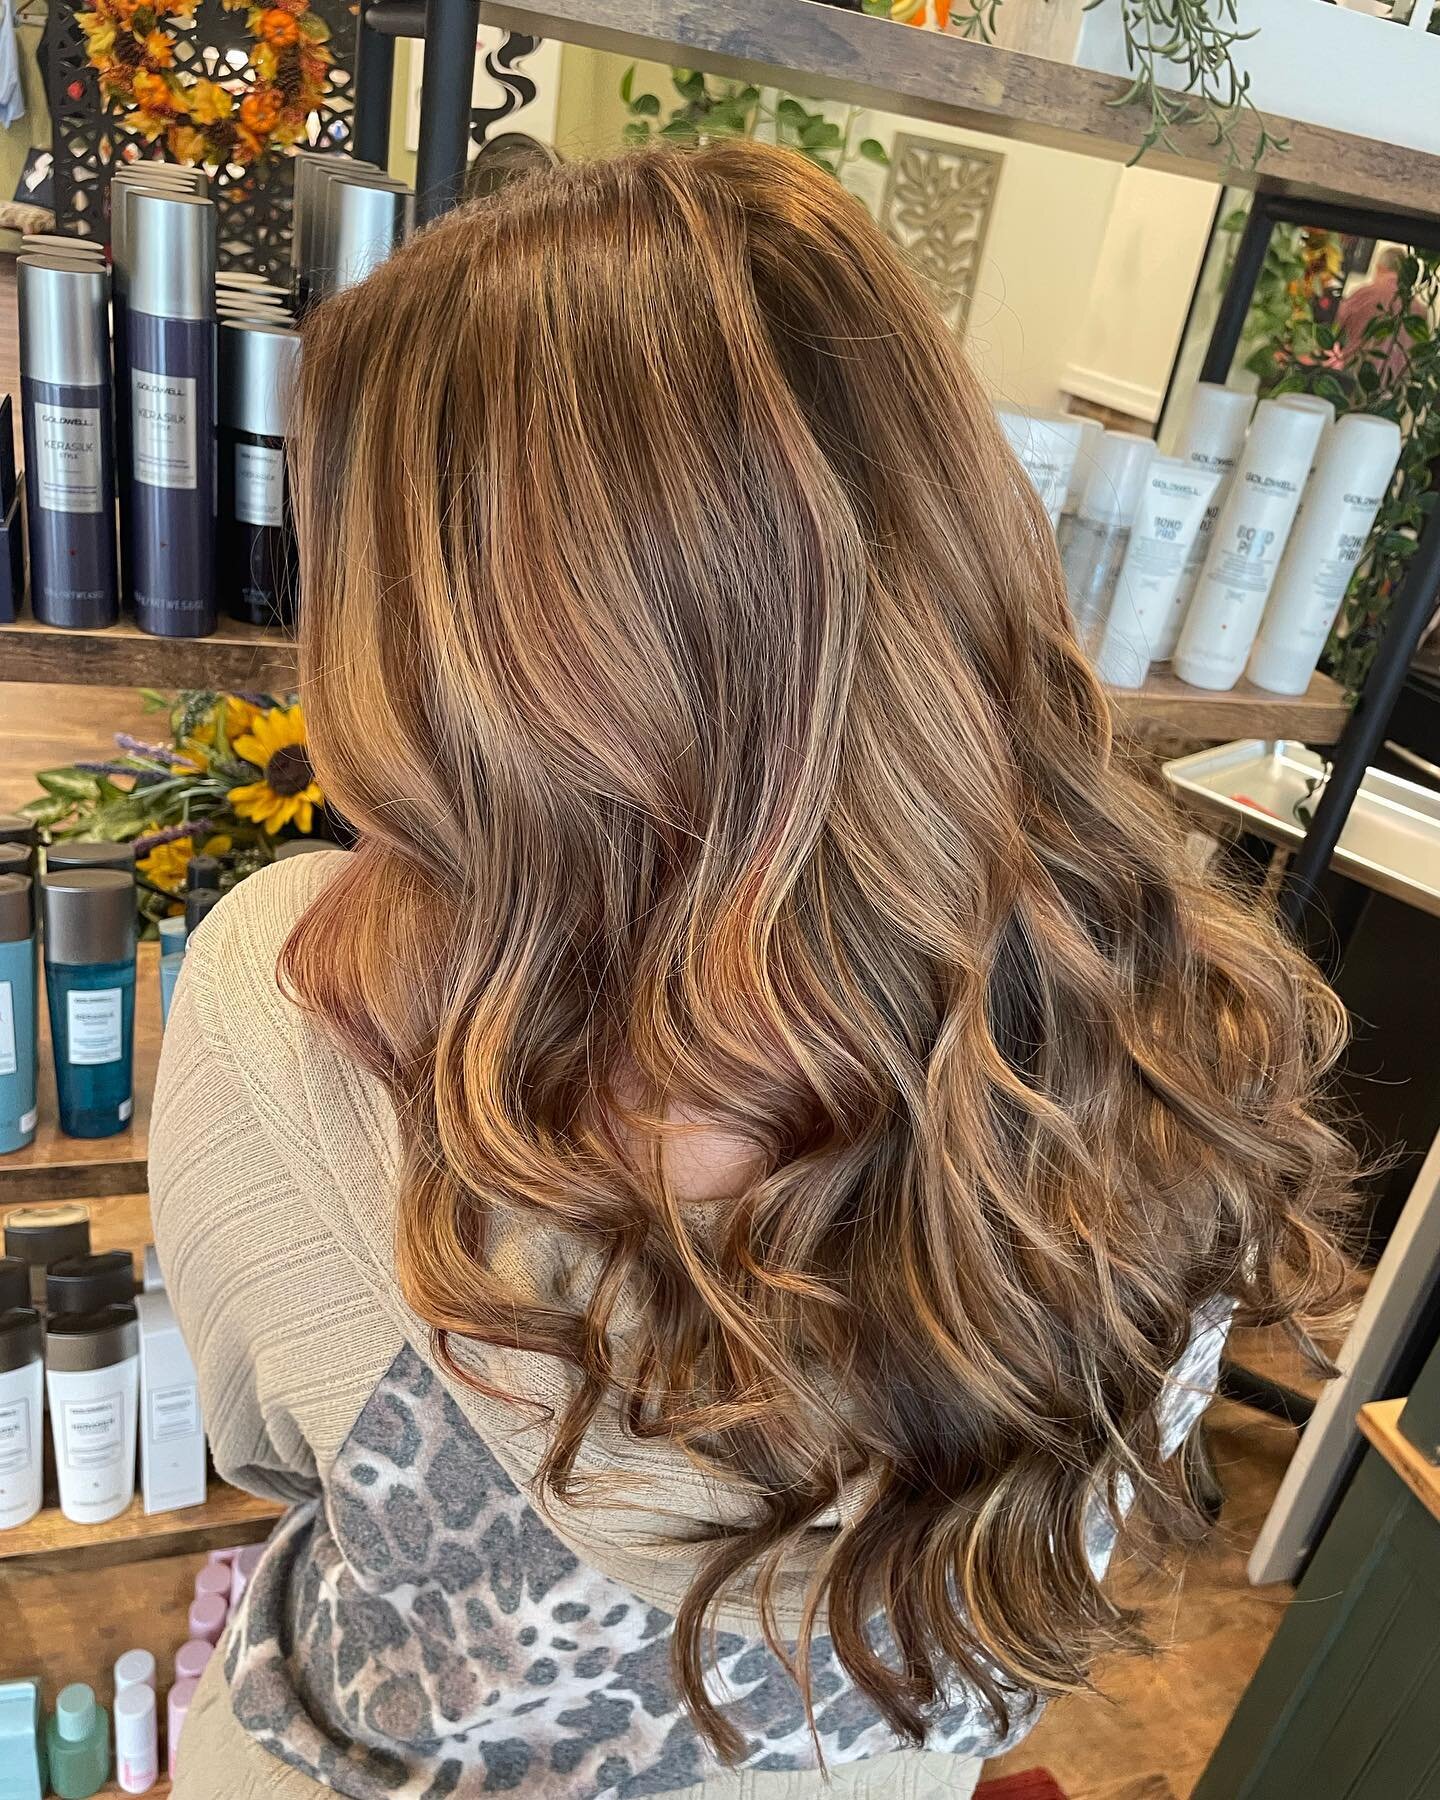 Fall blondes are the best 😍🍁✨
Hair by Alyssa Swope 
@witchy.hairdoctor 

Call Salon Sage at 856.624.9140

#goldwell #goldwellcolor #goldwellapprovedus #goldwellcolorance #goldwellpurepigments #goldwelltopchic #goldwellsalon #njsalon #njstylist #beh